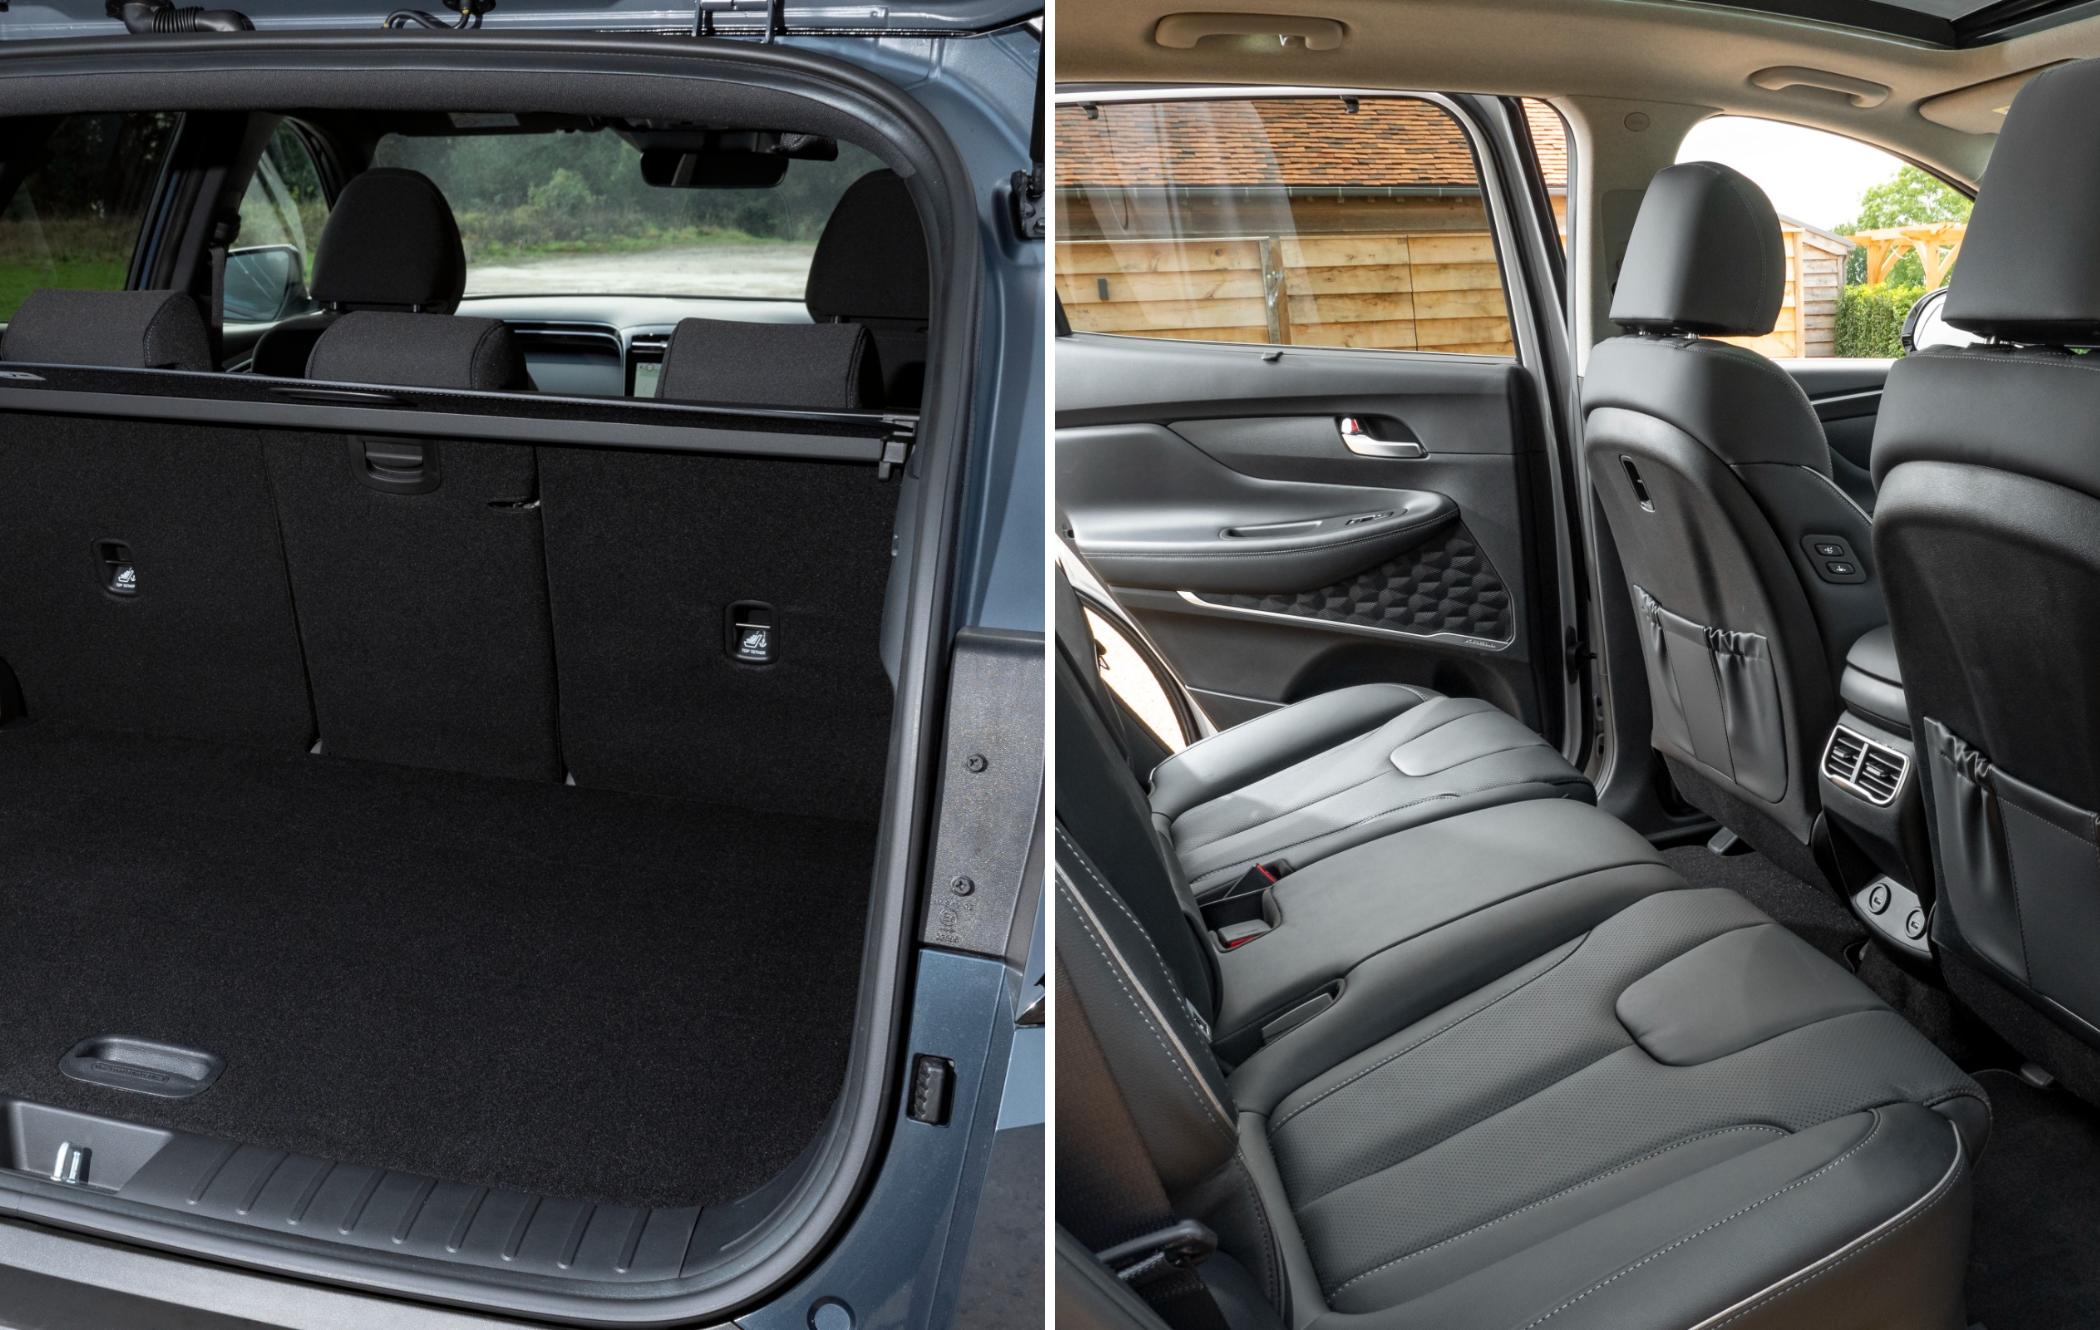 on the left is a tucson's boot and on the right are the back seats of a santa fe